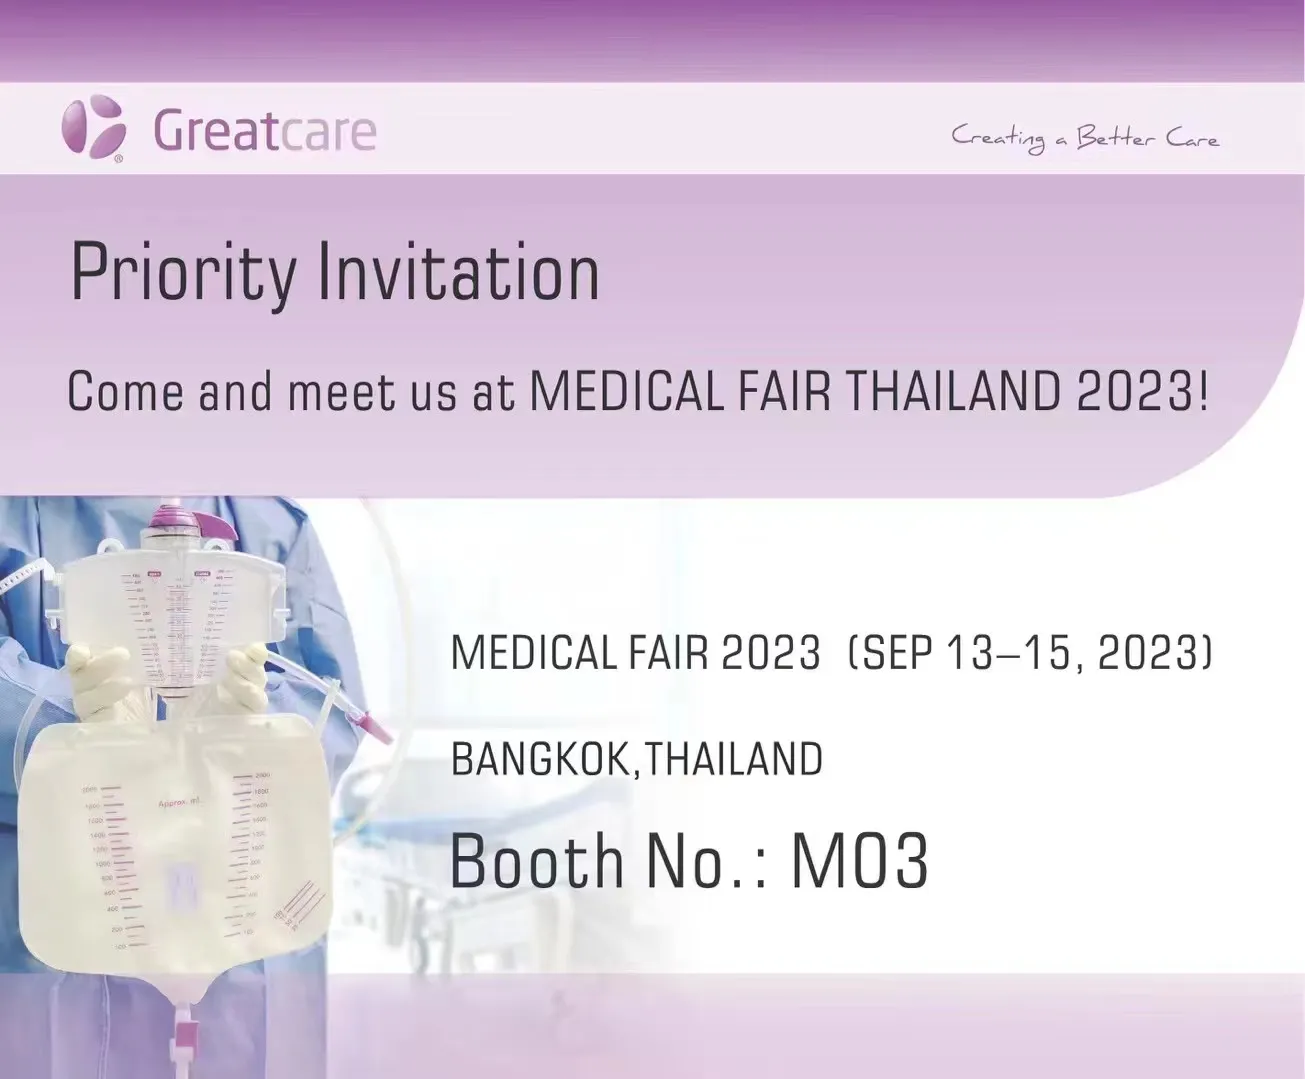 Greatcare team is participating in the Medical Fair Thailand 2023